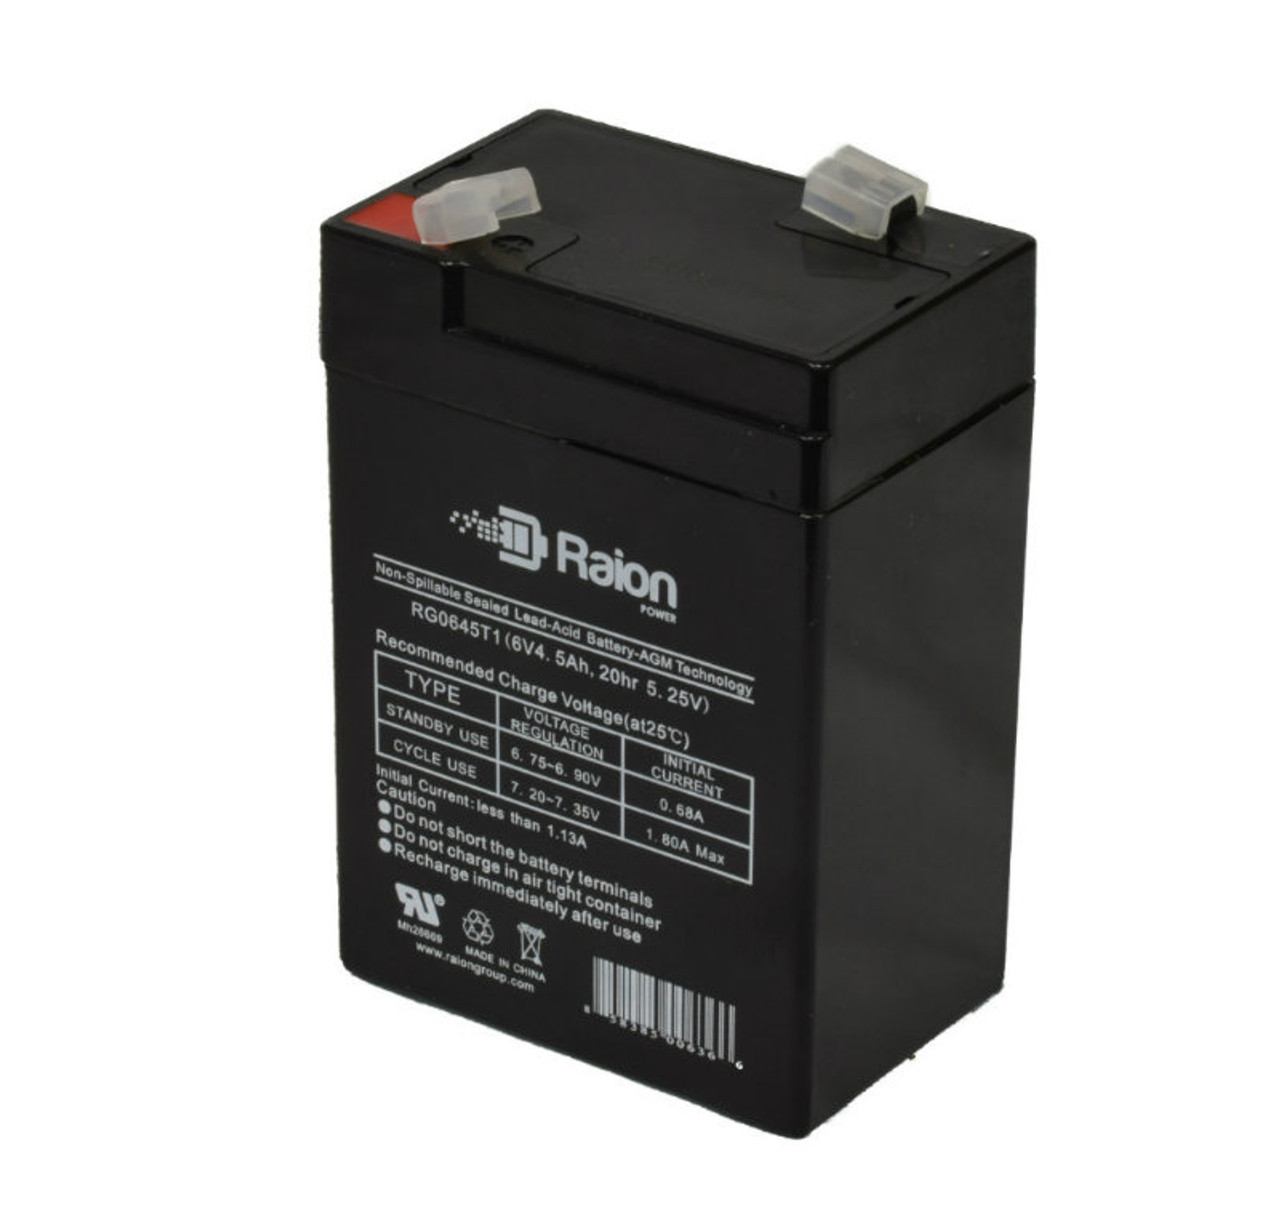 Raion Power RG0645T1 6V 4.5Ah Replacement Battery Cartridge for TOBBI 6V Ride On Motorcycle Battery Power 3 Wheel Bicycle